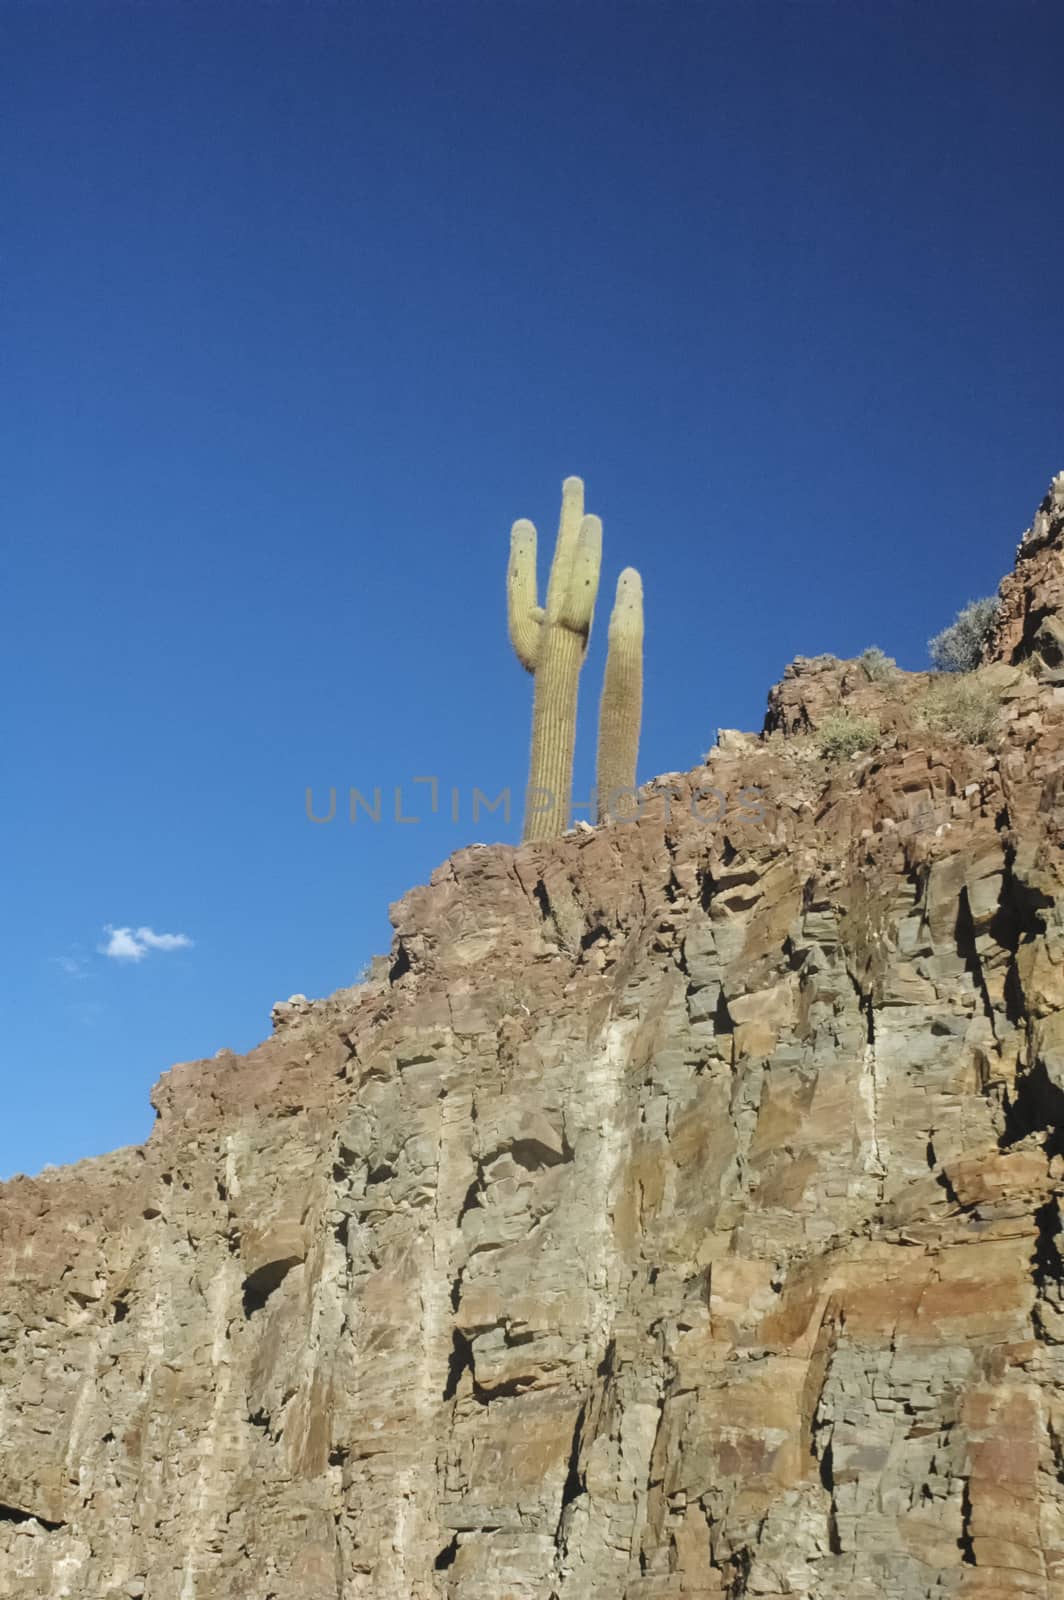 View of a cactus in the Andes